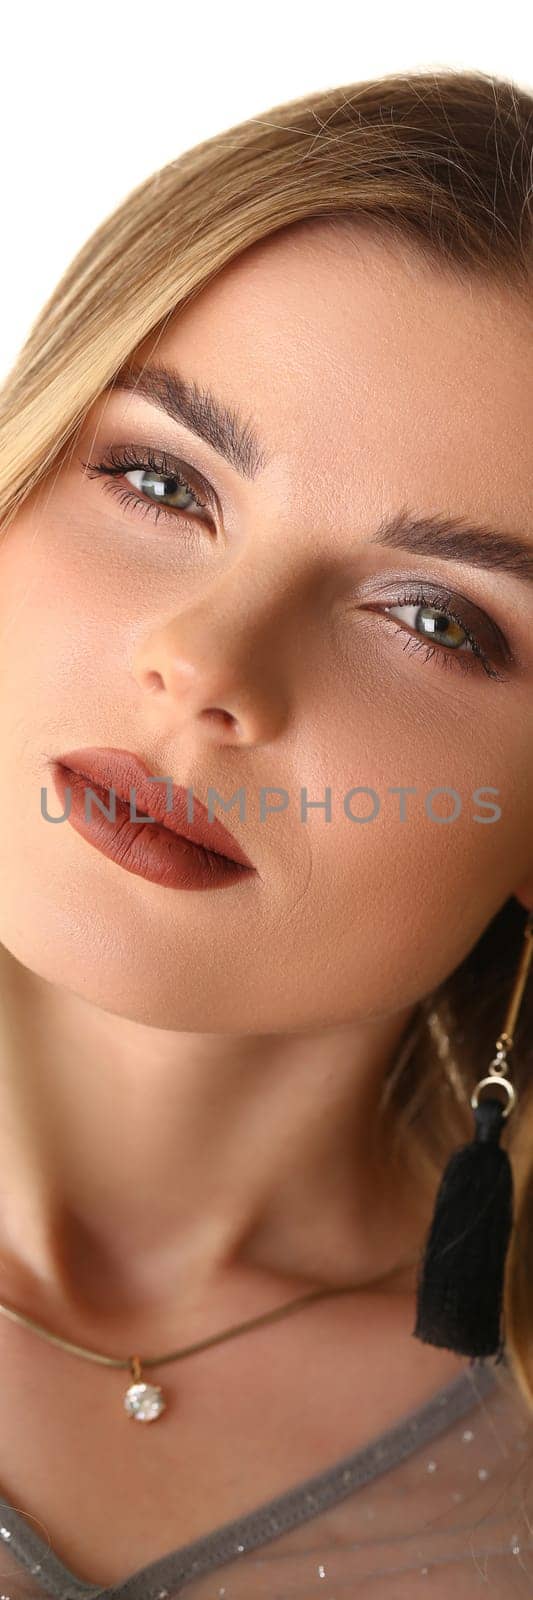 Portrait of a young beautiful woman with evening makeup with pigtails. Fashion nude makeup concept